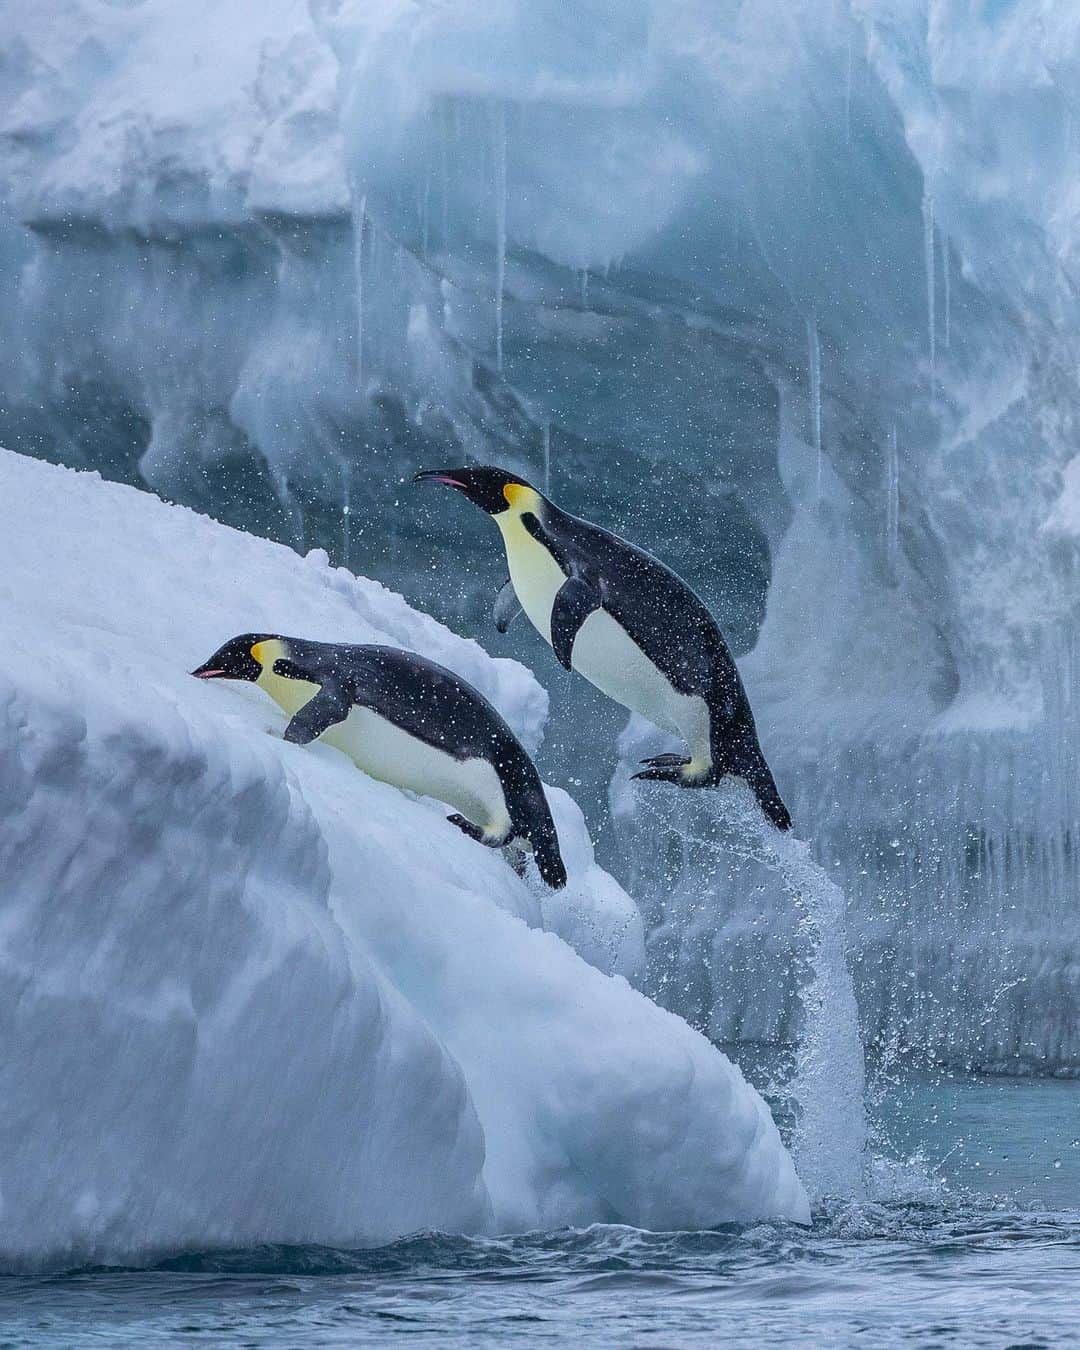 Tim Lamanのインスタグラム：「Photos by @TimLaman.  Emperor Penguins were one of the highlights of my recent Antarctica voyage!  Join my newsletter at my link in bio for more photos and stories from my adventures.  #emperorpenguin #penguin #antarctica #birds #birdphotography」